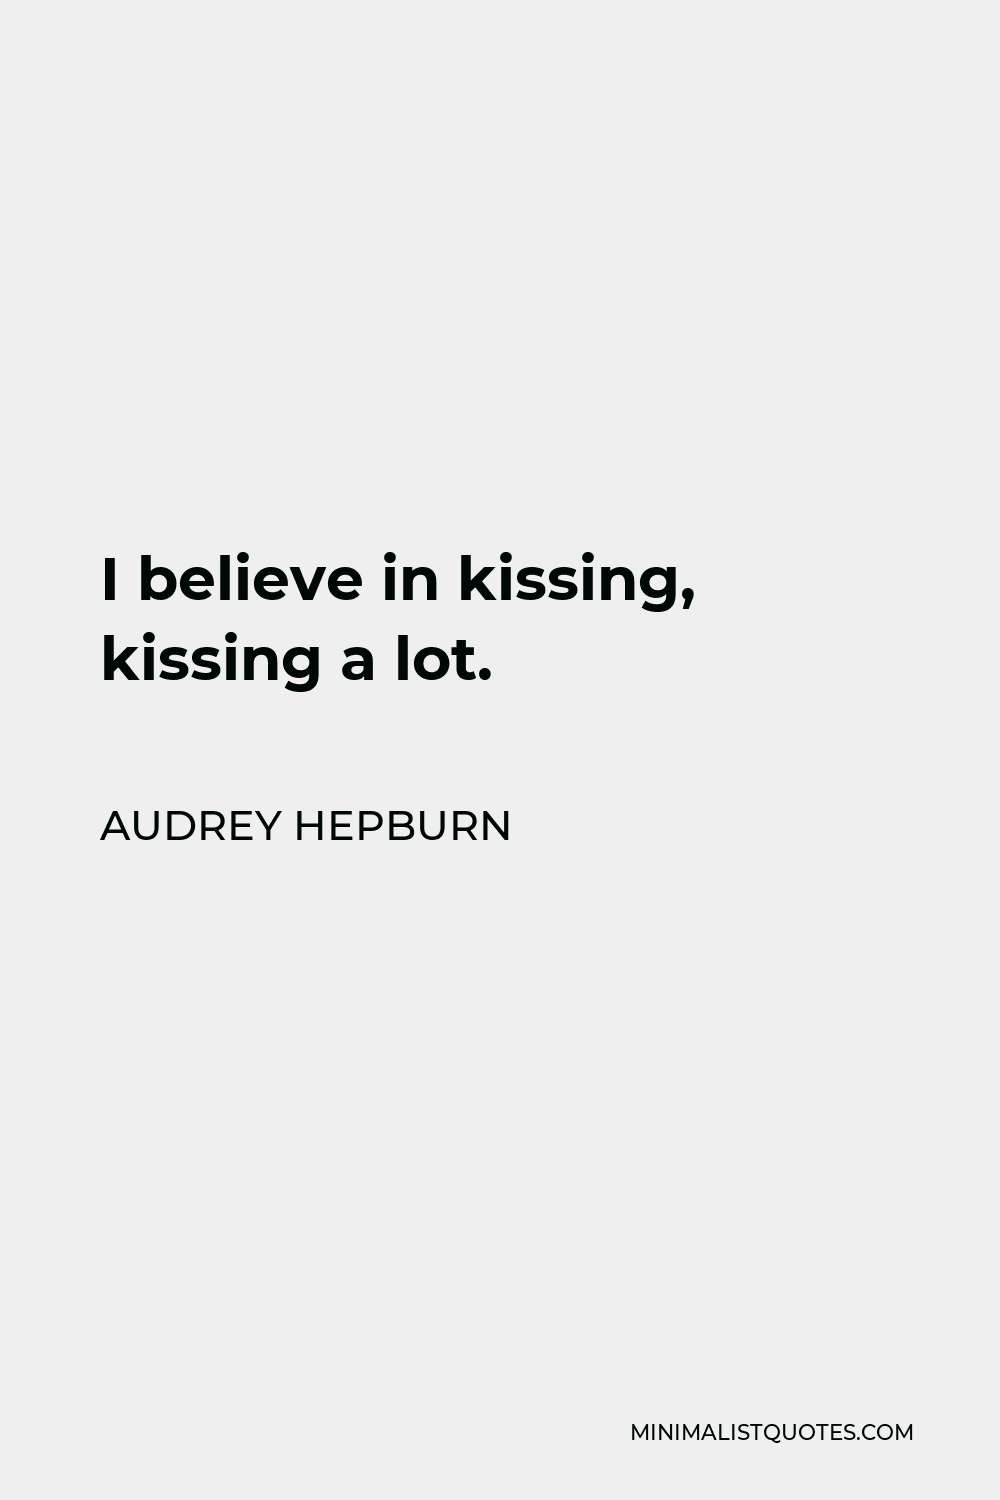 Audrey Hepburn Quote - I believe in kissing, kissing a lot.